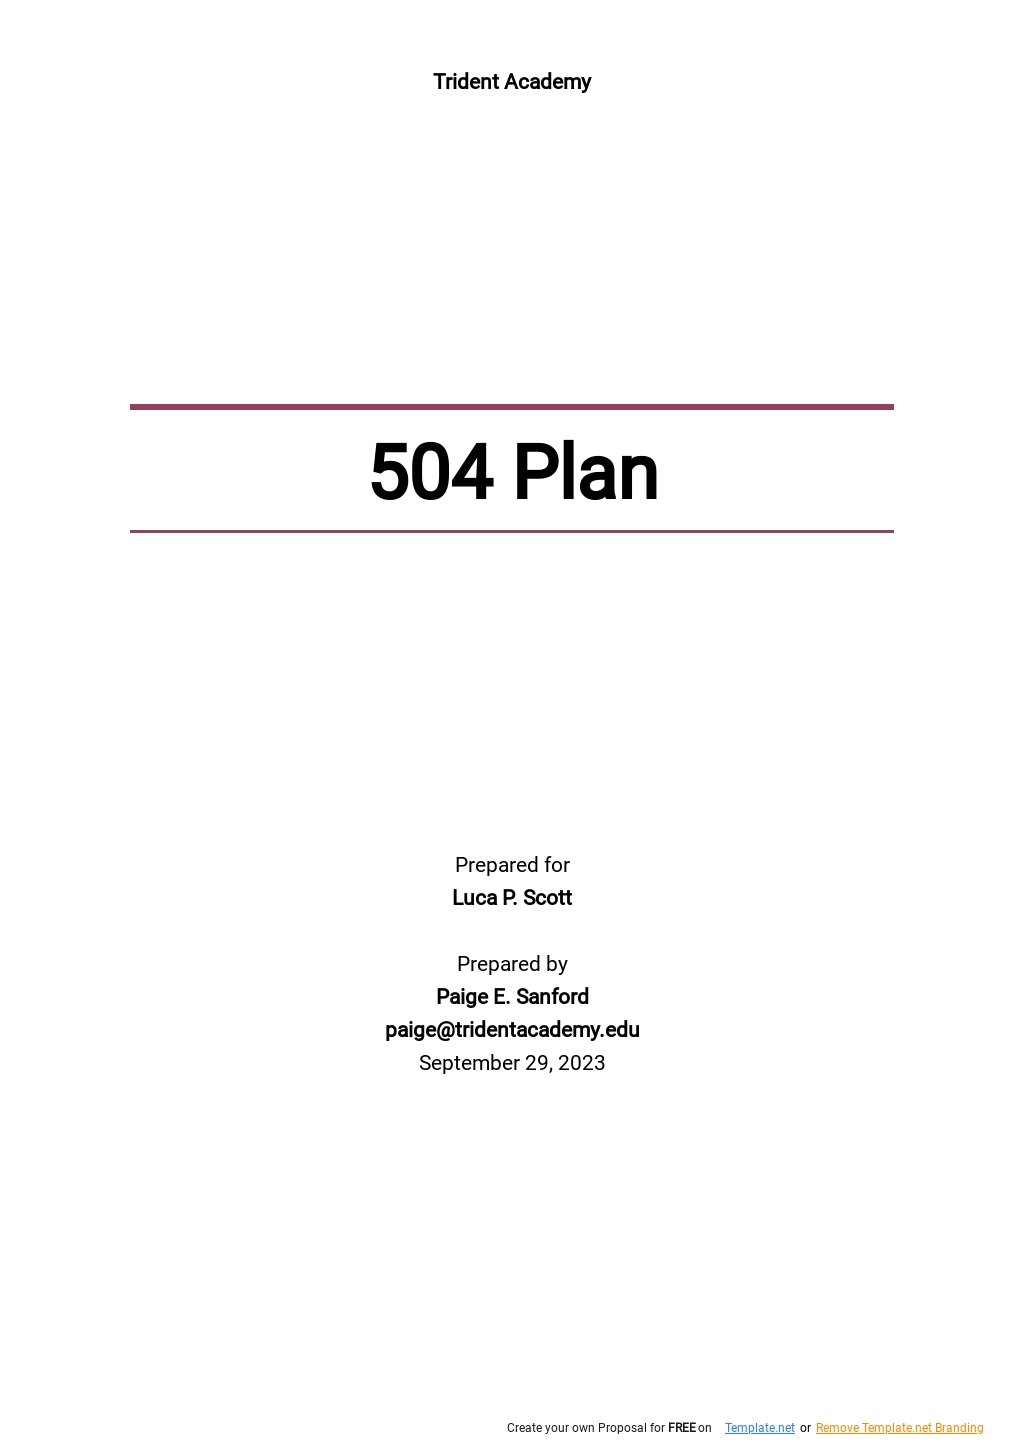 504 Plan Templates Documents, Design, Free, Download